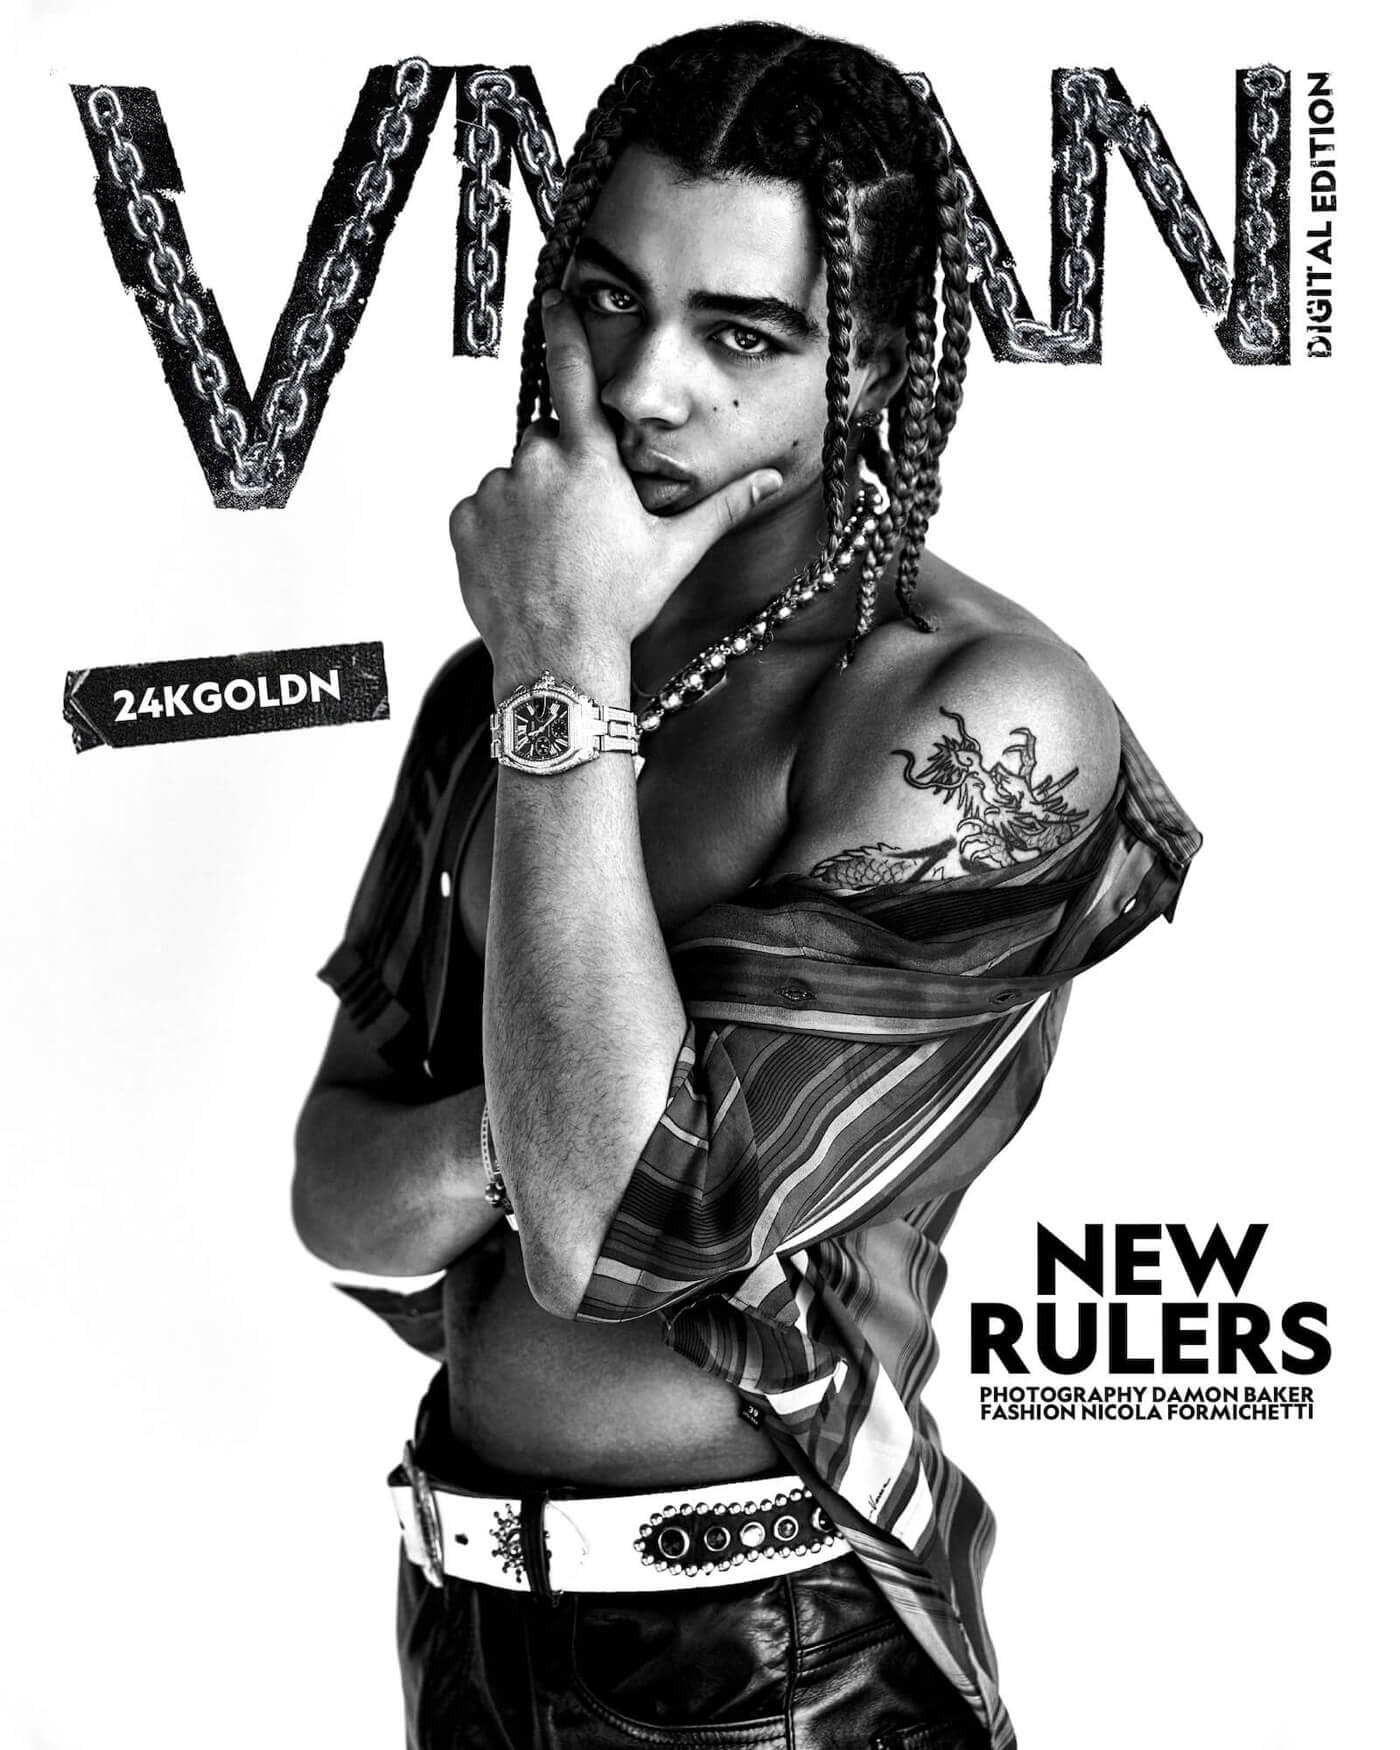 24kgoldn for VMAN 2021 Digital Issue 'New Rulers'